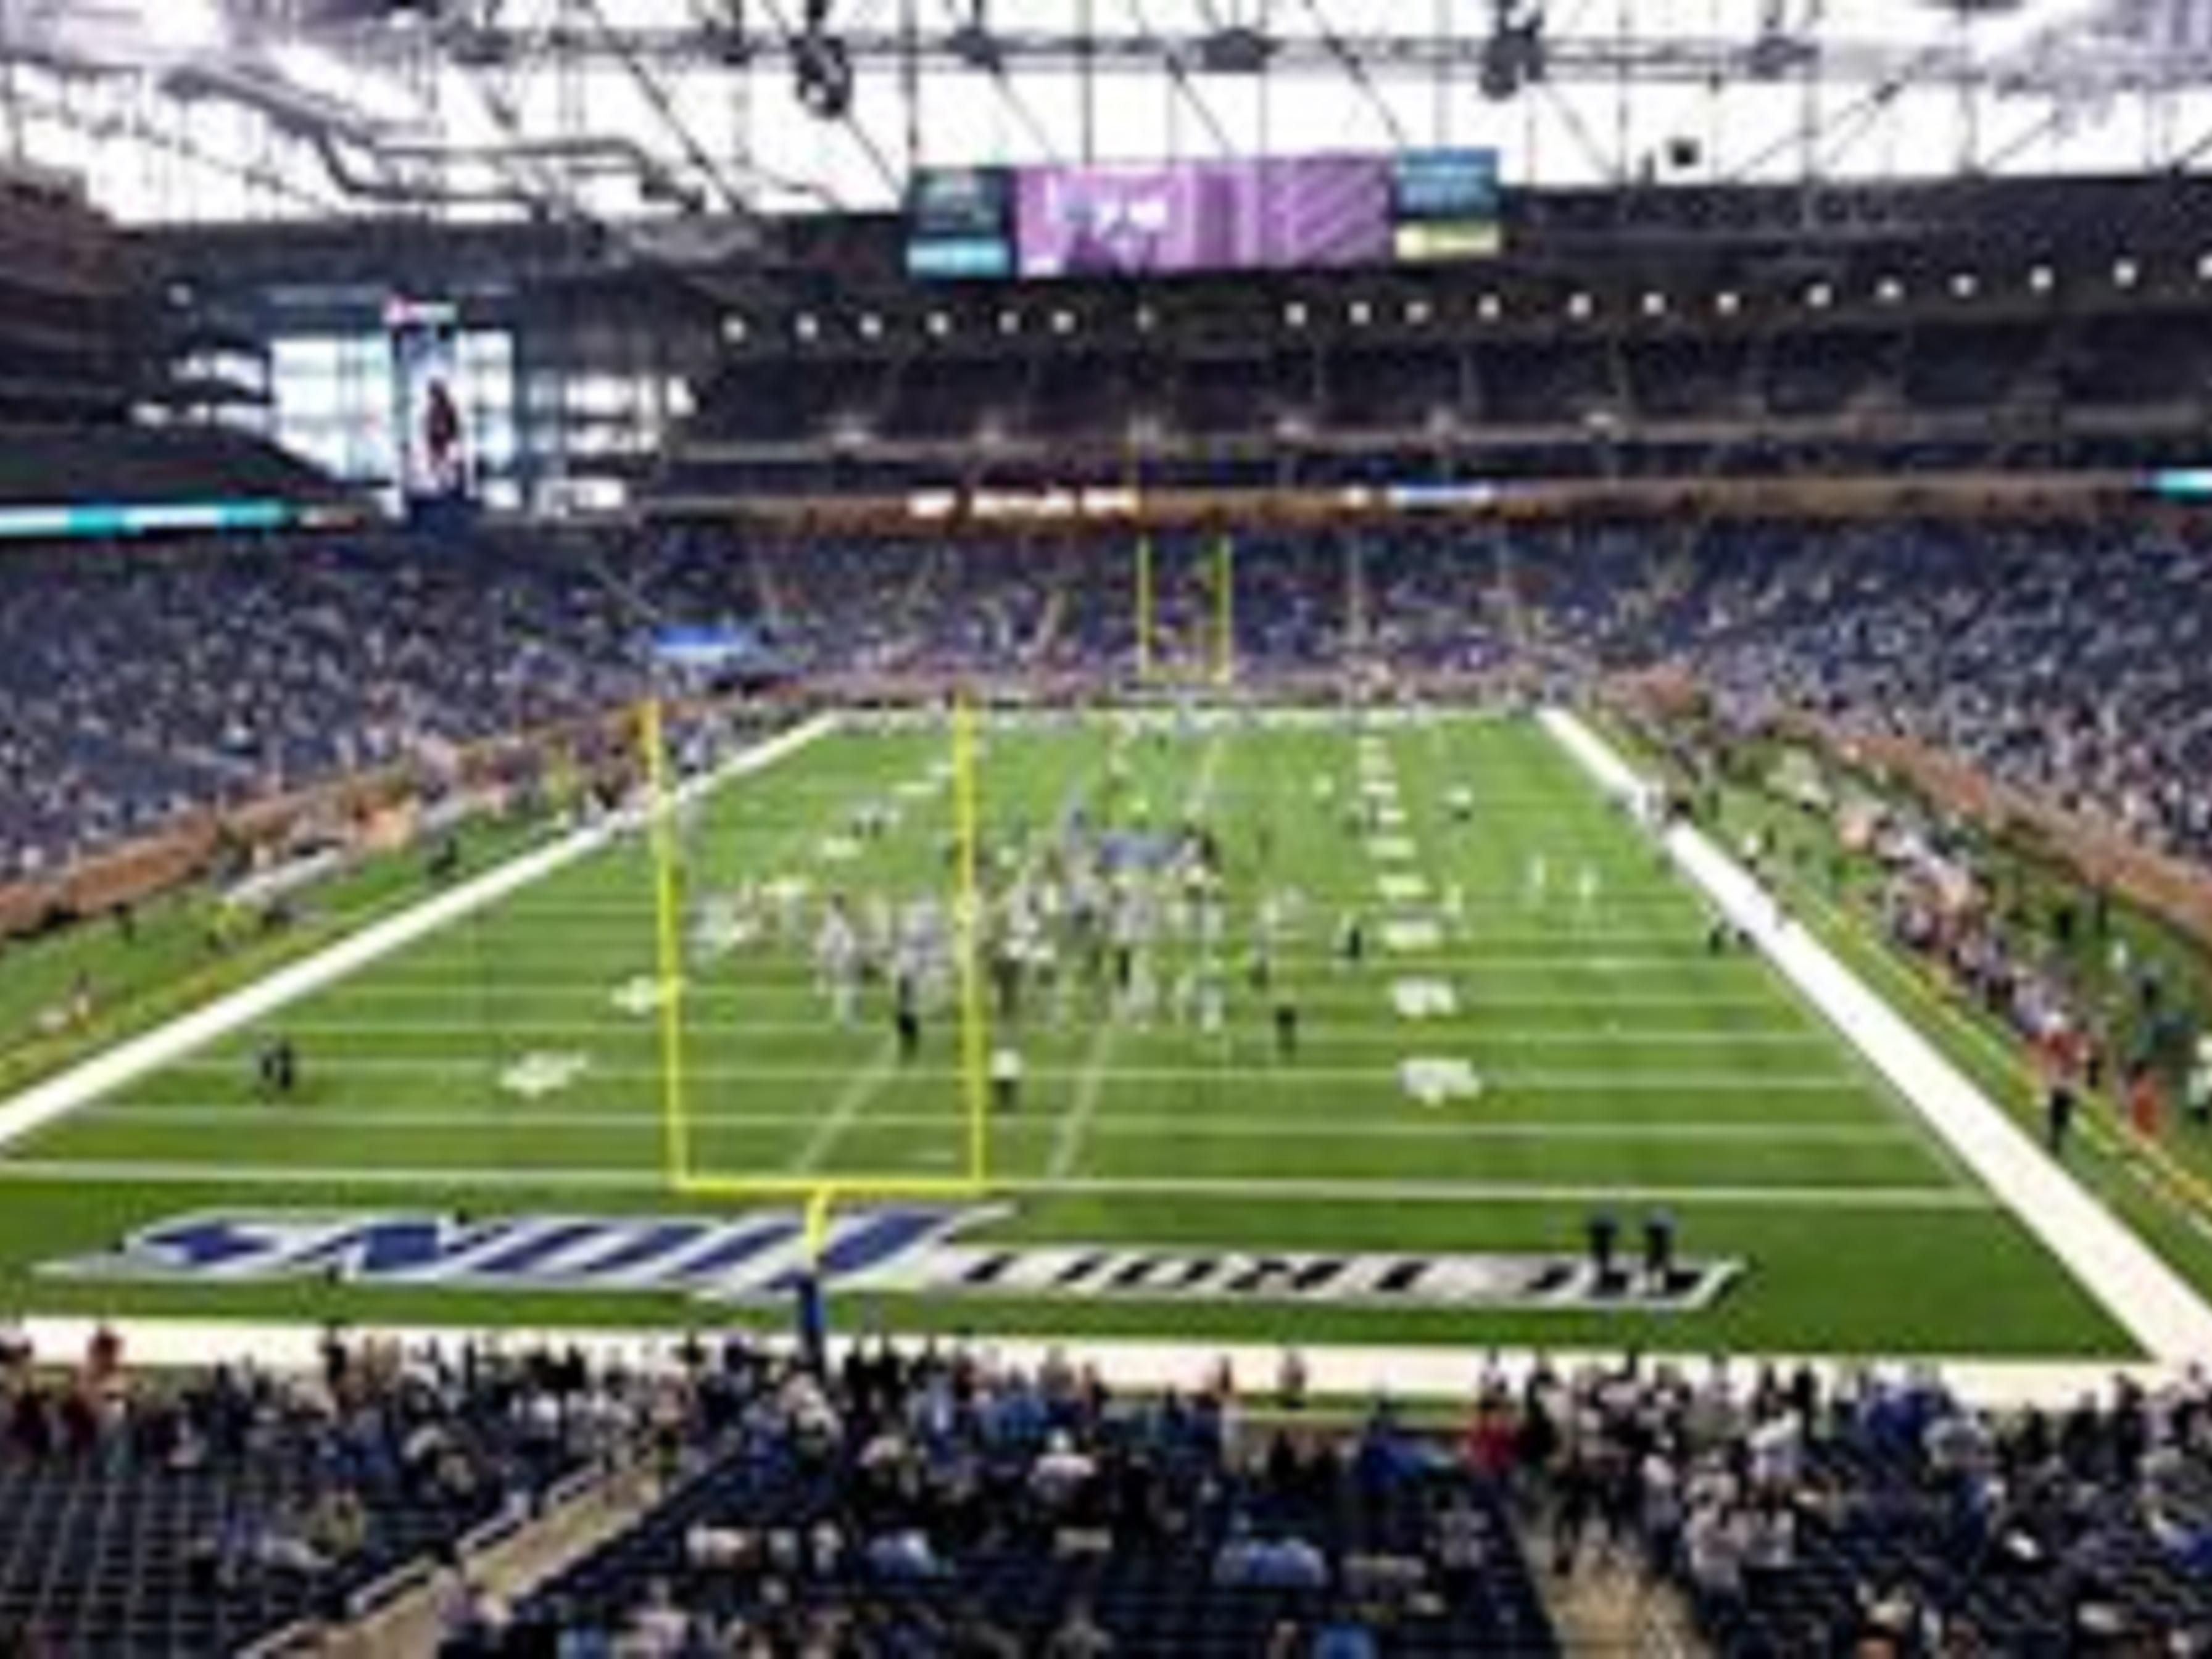 See the Detroit Lions or see a concert at Ford Field.